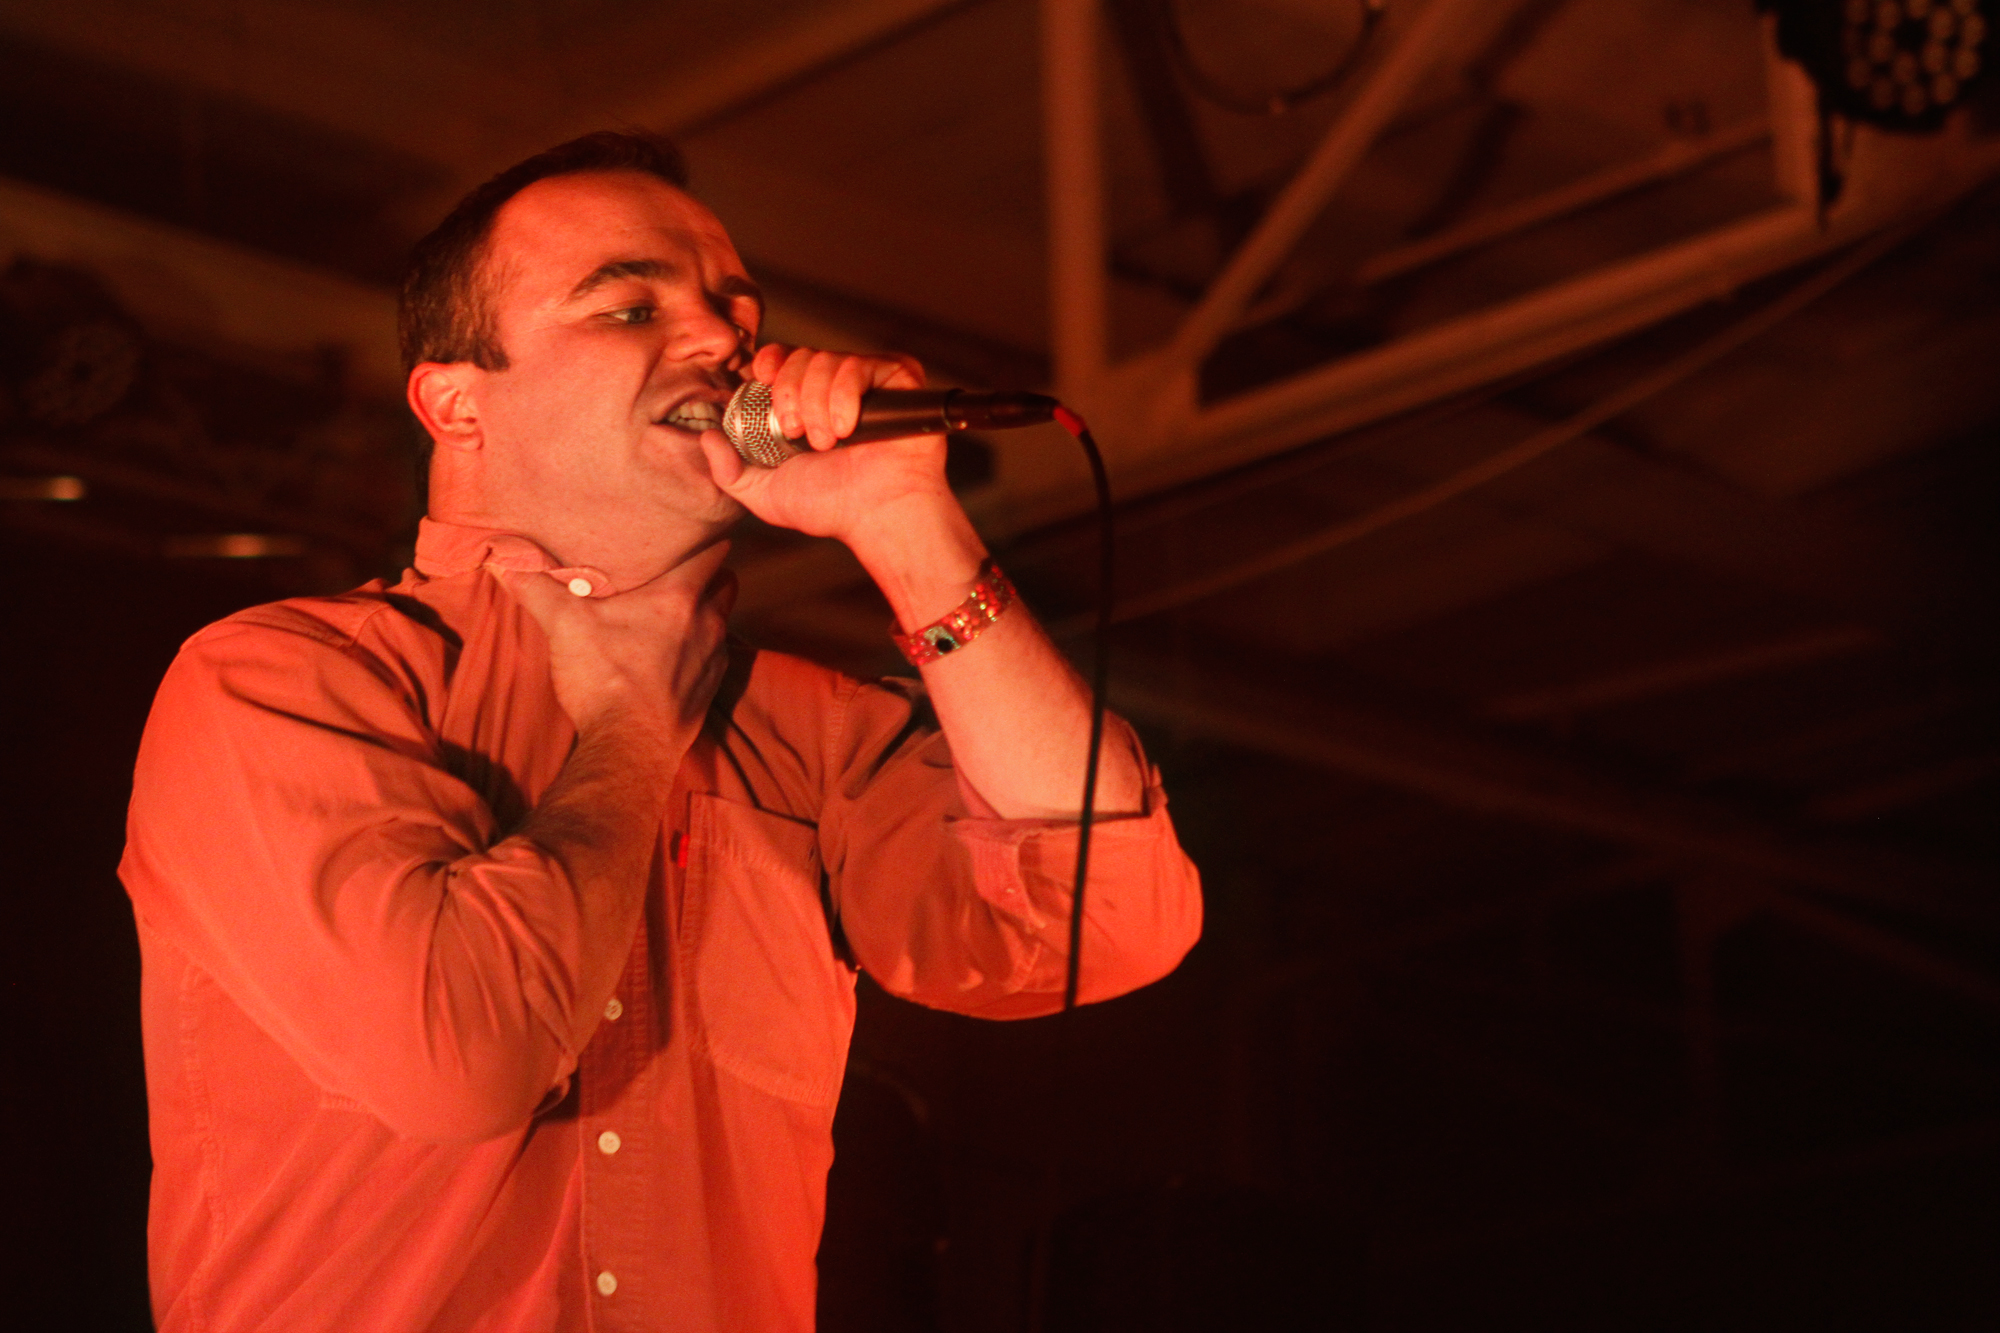 Future Islands plays at House Of Vans in Williamsburg, Brooklyn, NY on Aug. 7, 2014.